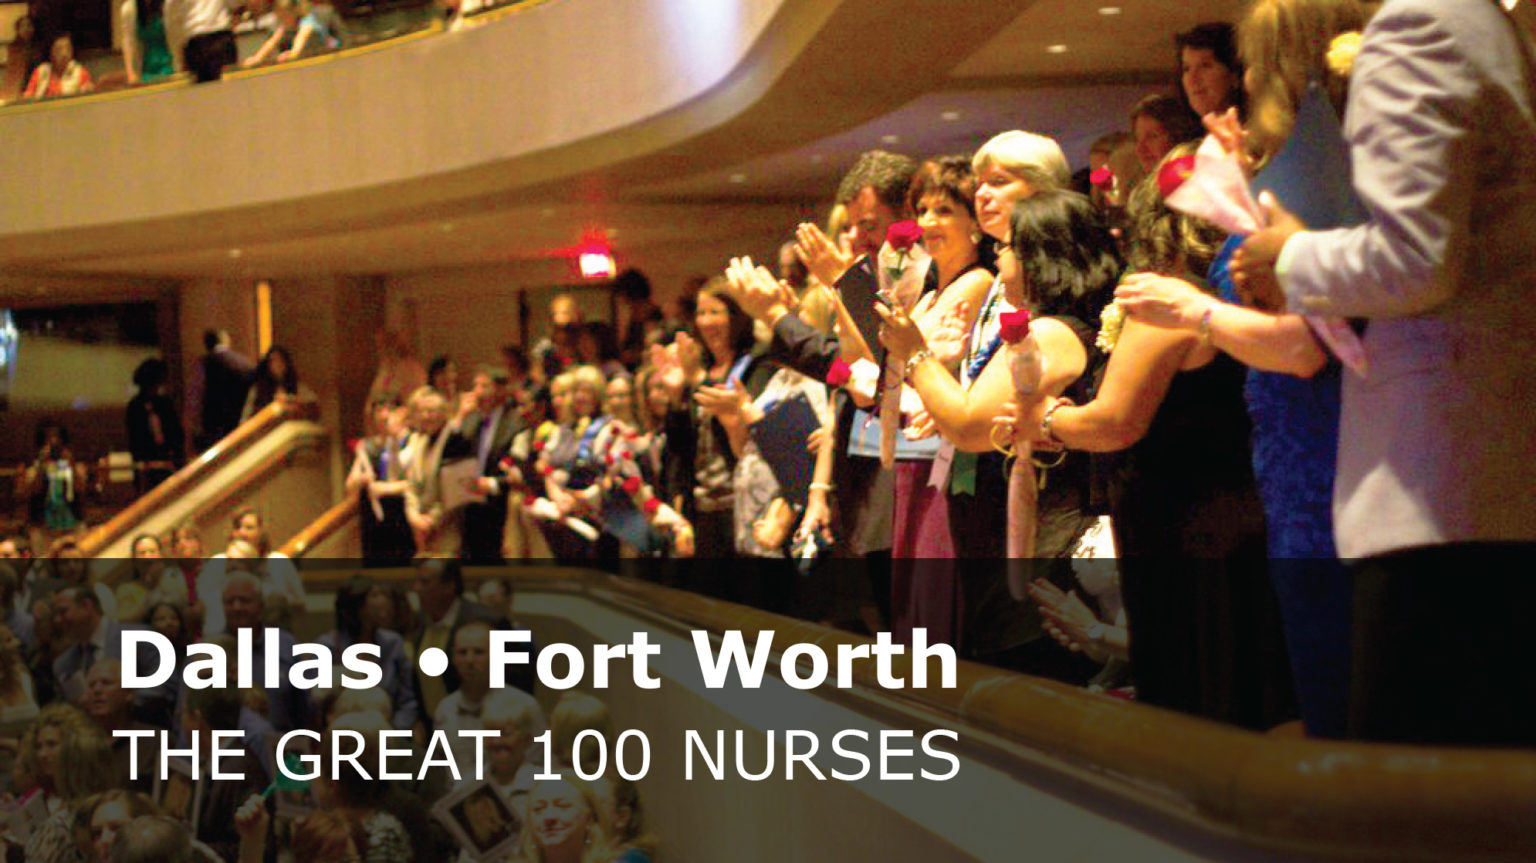 DFW Great 100 Nurses drops video highlighting this year’s honorees